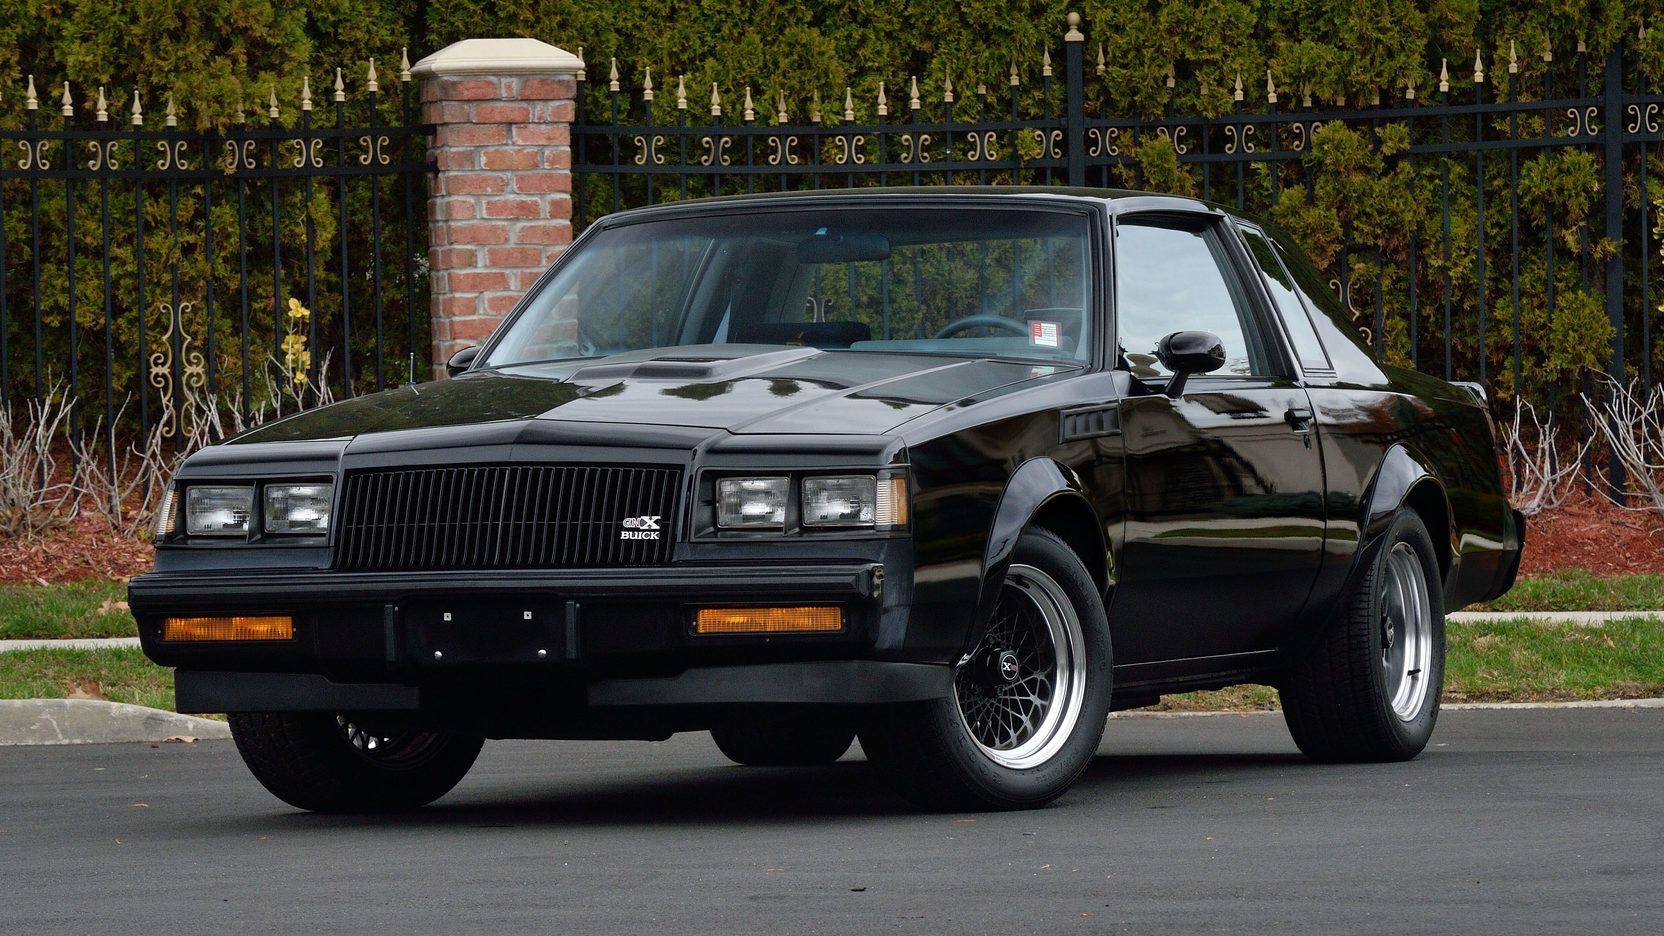 Black 1987 Buick Regal GNX on the road